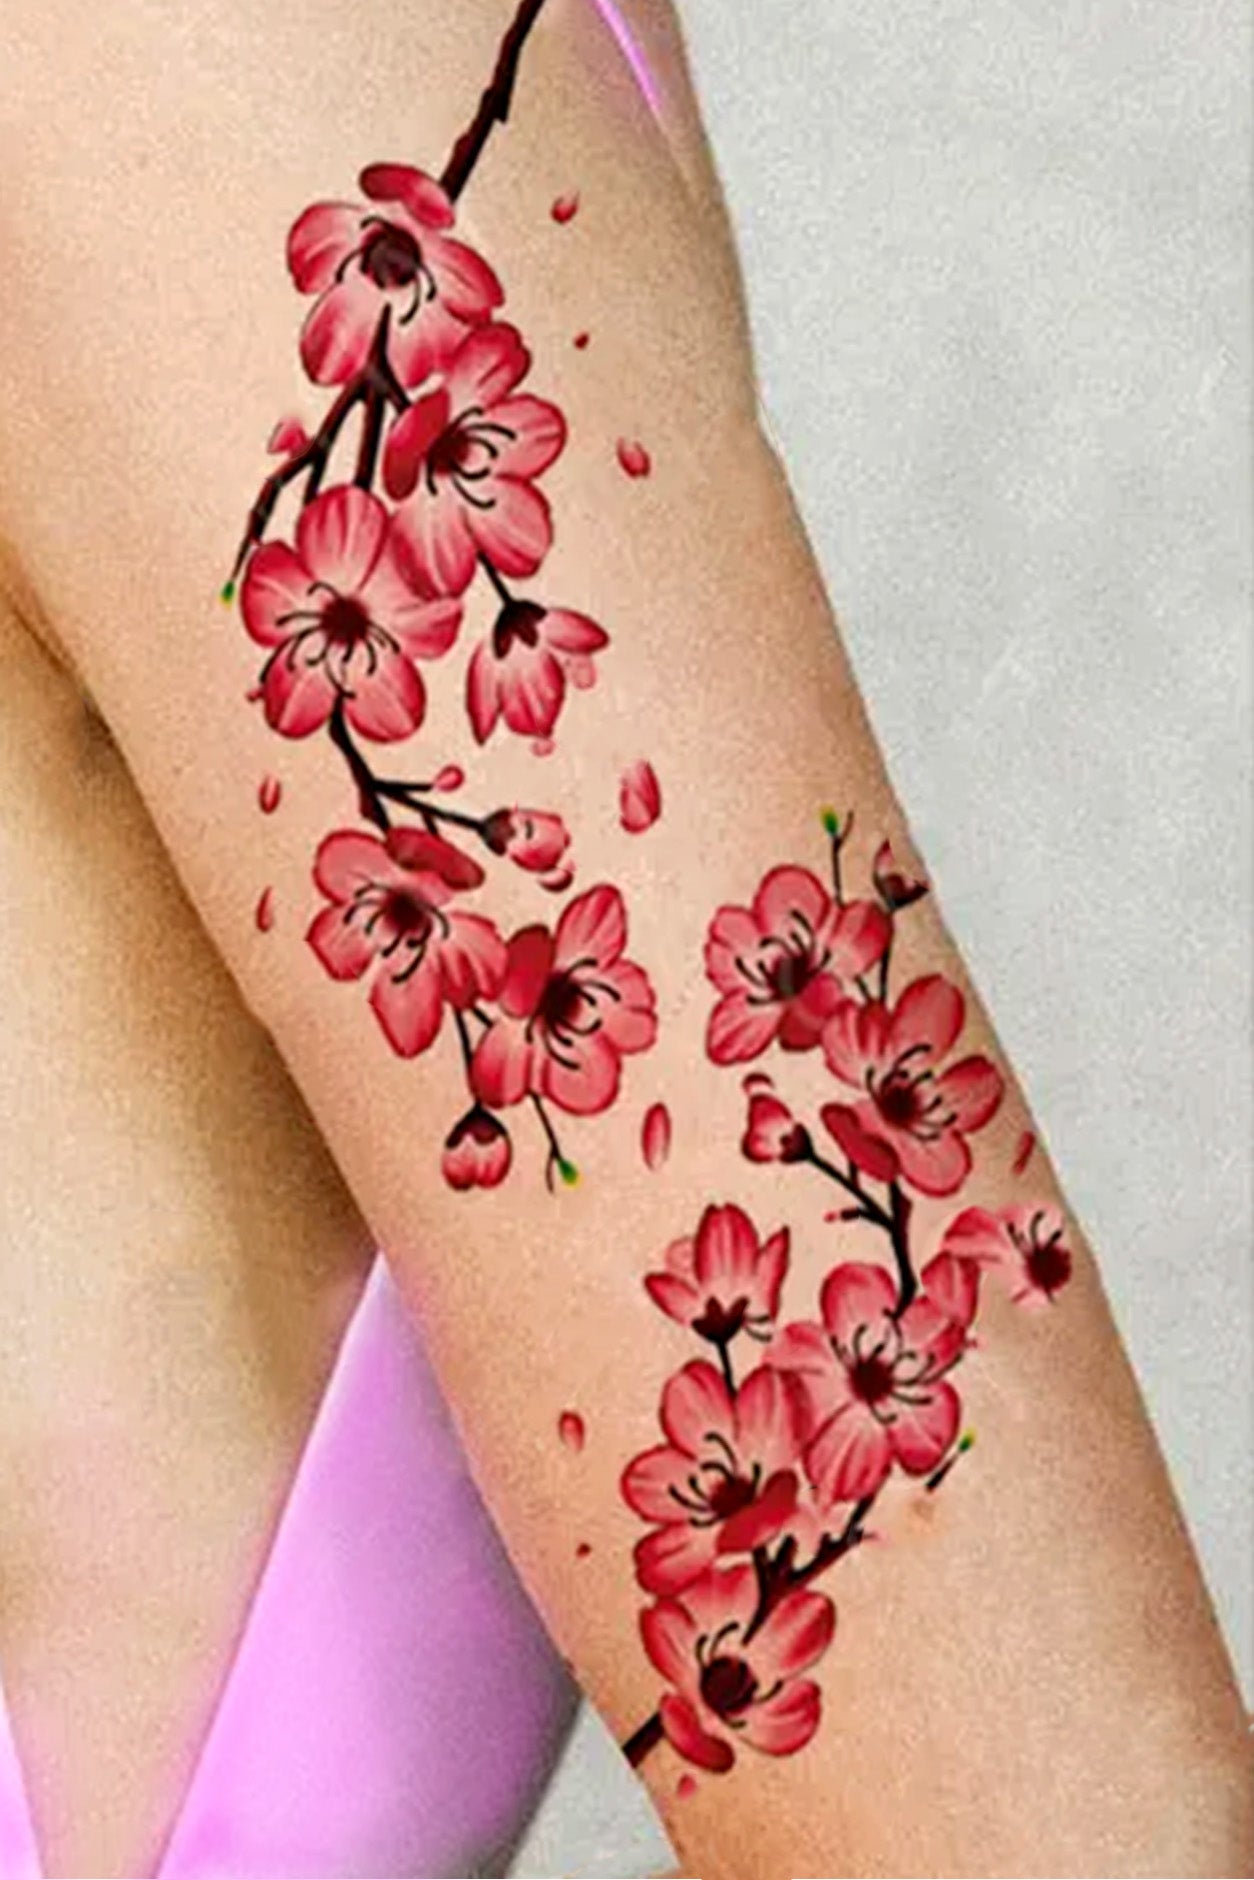 A womans arm shows the upper section with two rows of cherry blossoms. Wear them individually or together. You can also rope them around like a bracelet around arm or leg.